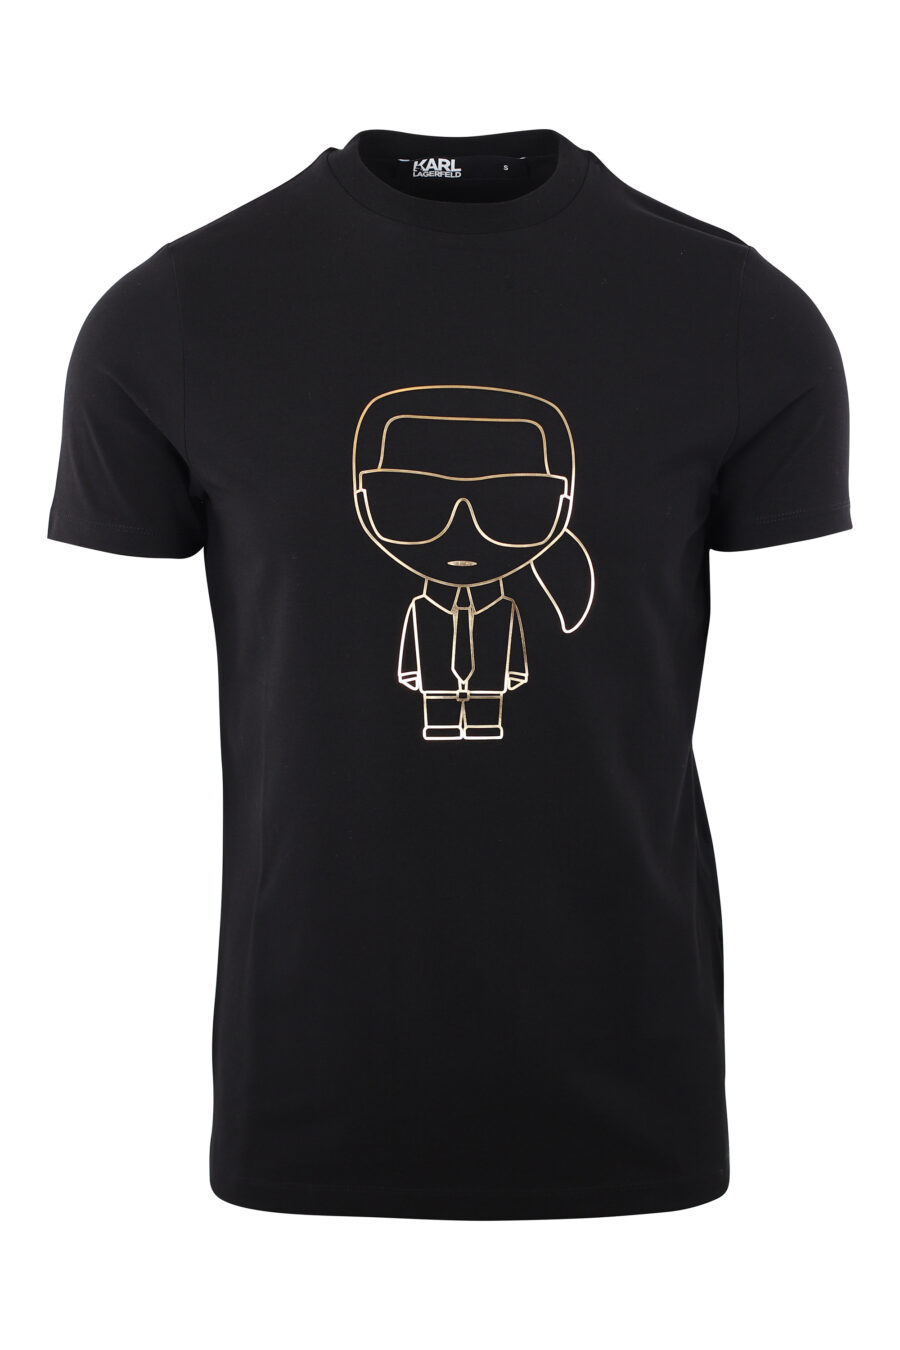 Black T-shirt with gold silhouette logo - IMG 1980